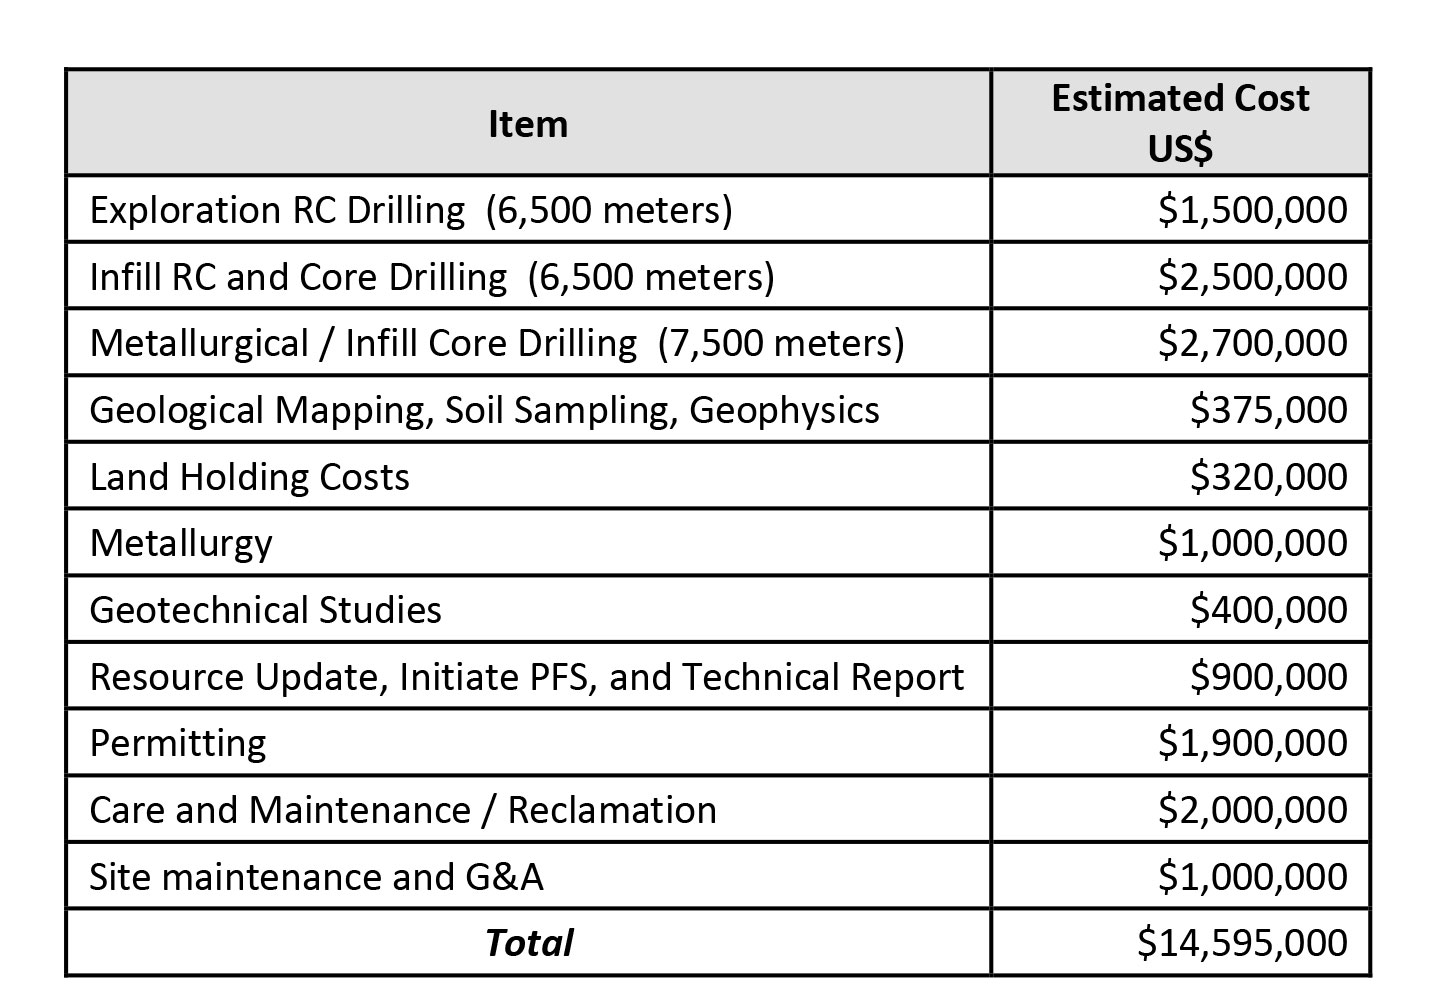 Summary of Integra Estimated Costs for Recommended Program